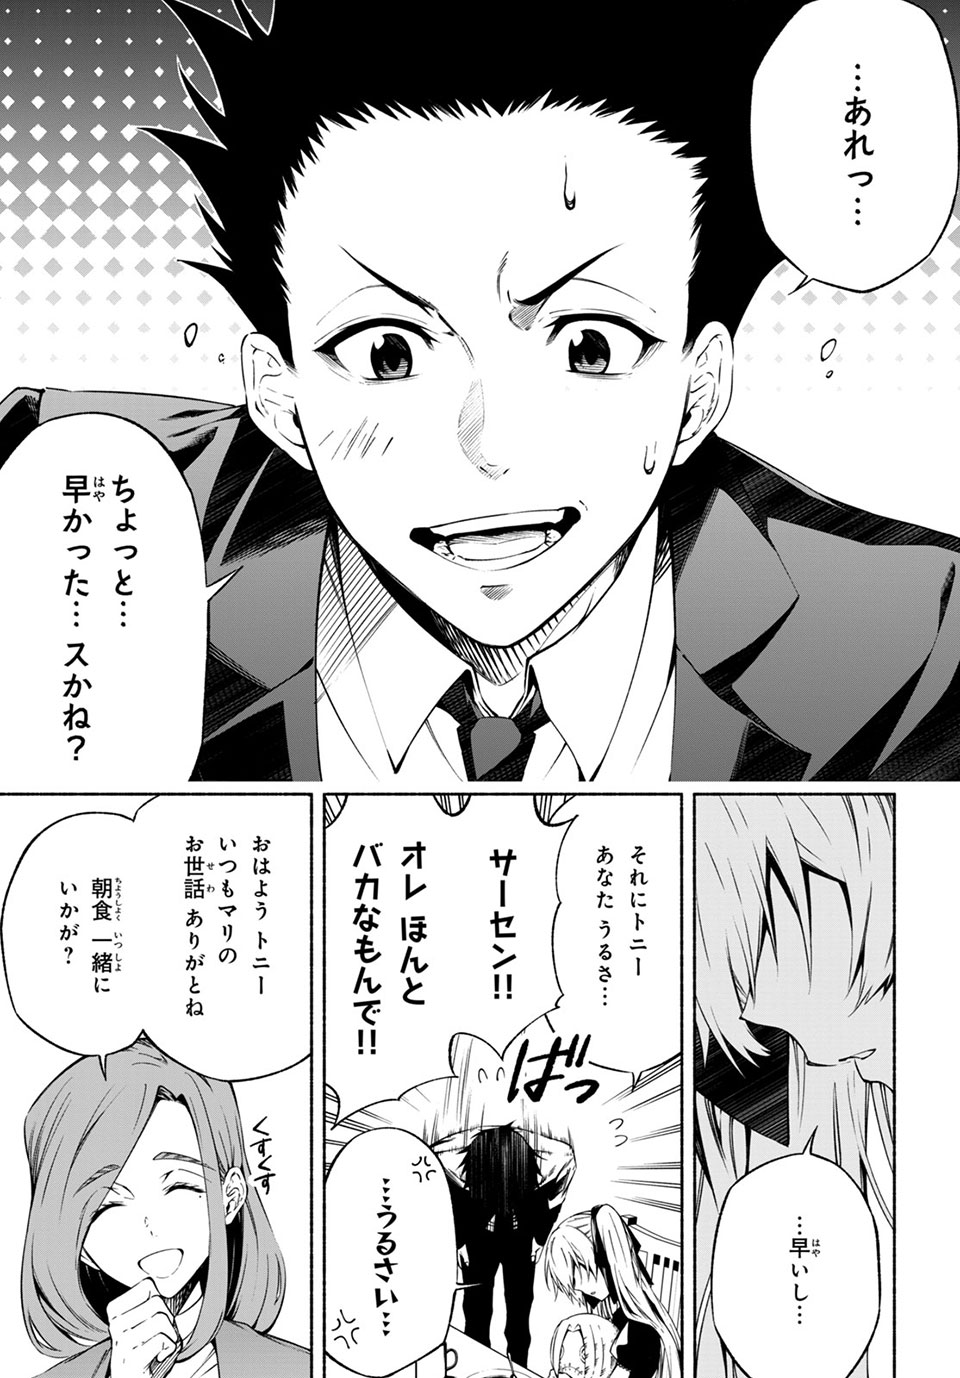 Shaman King: and a garden 第11.2話 - Page 4